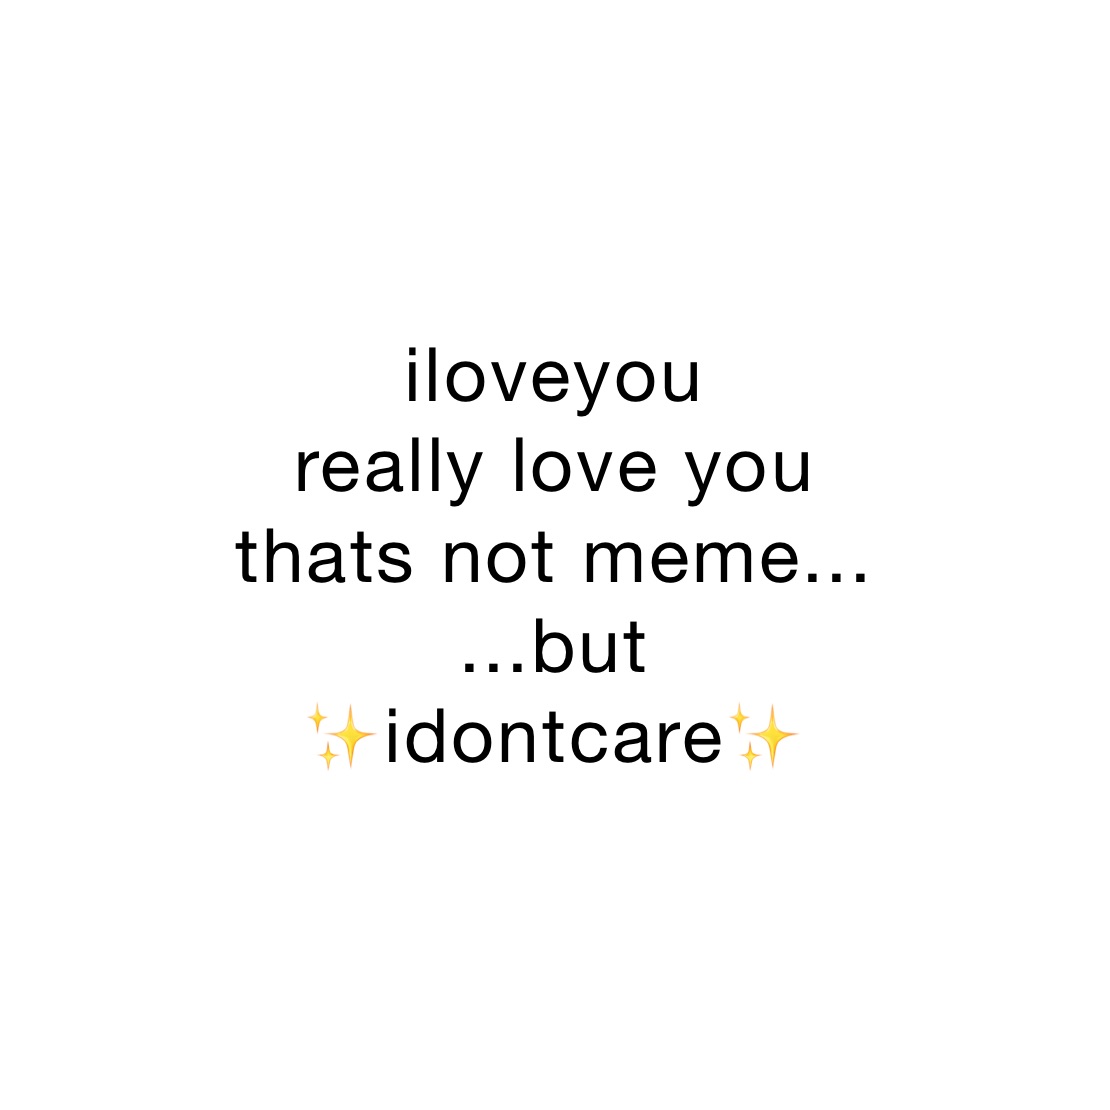 iloveyou
really love you
thats not meme...
...but
✨idontcare✨